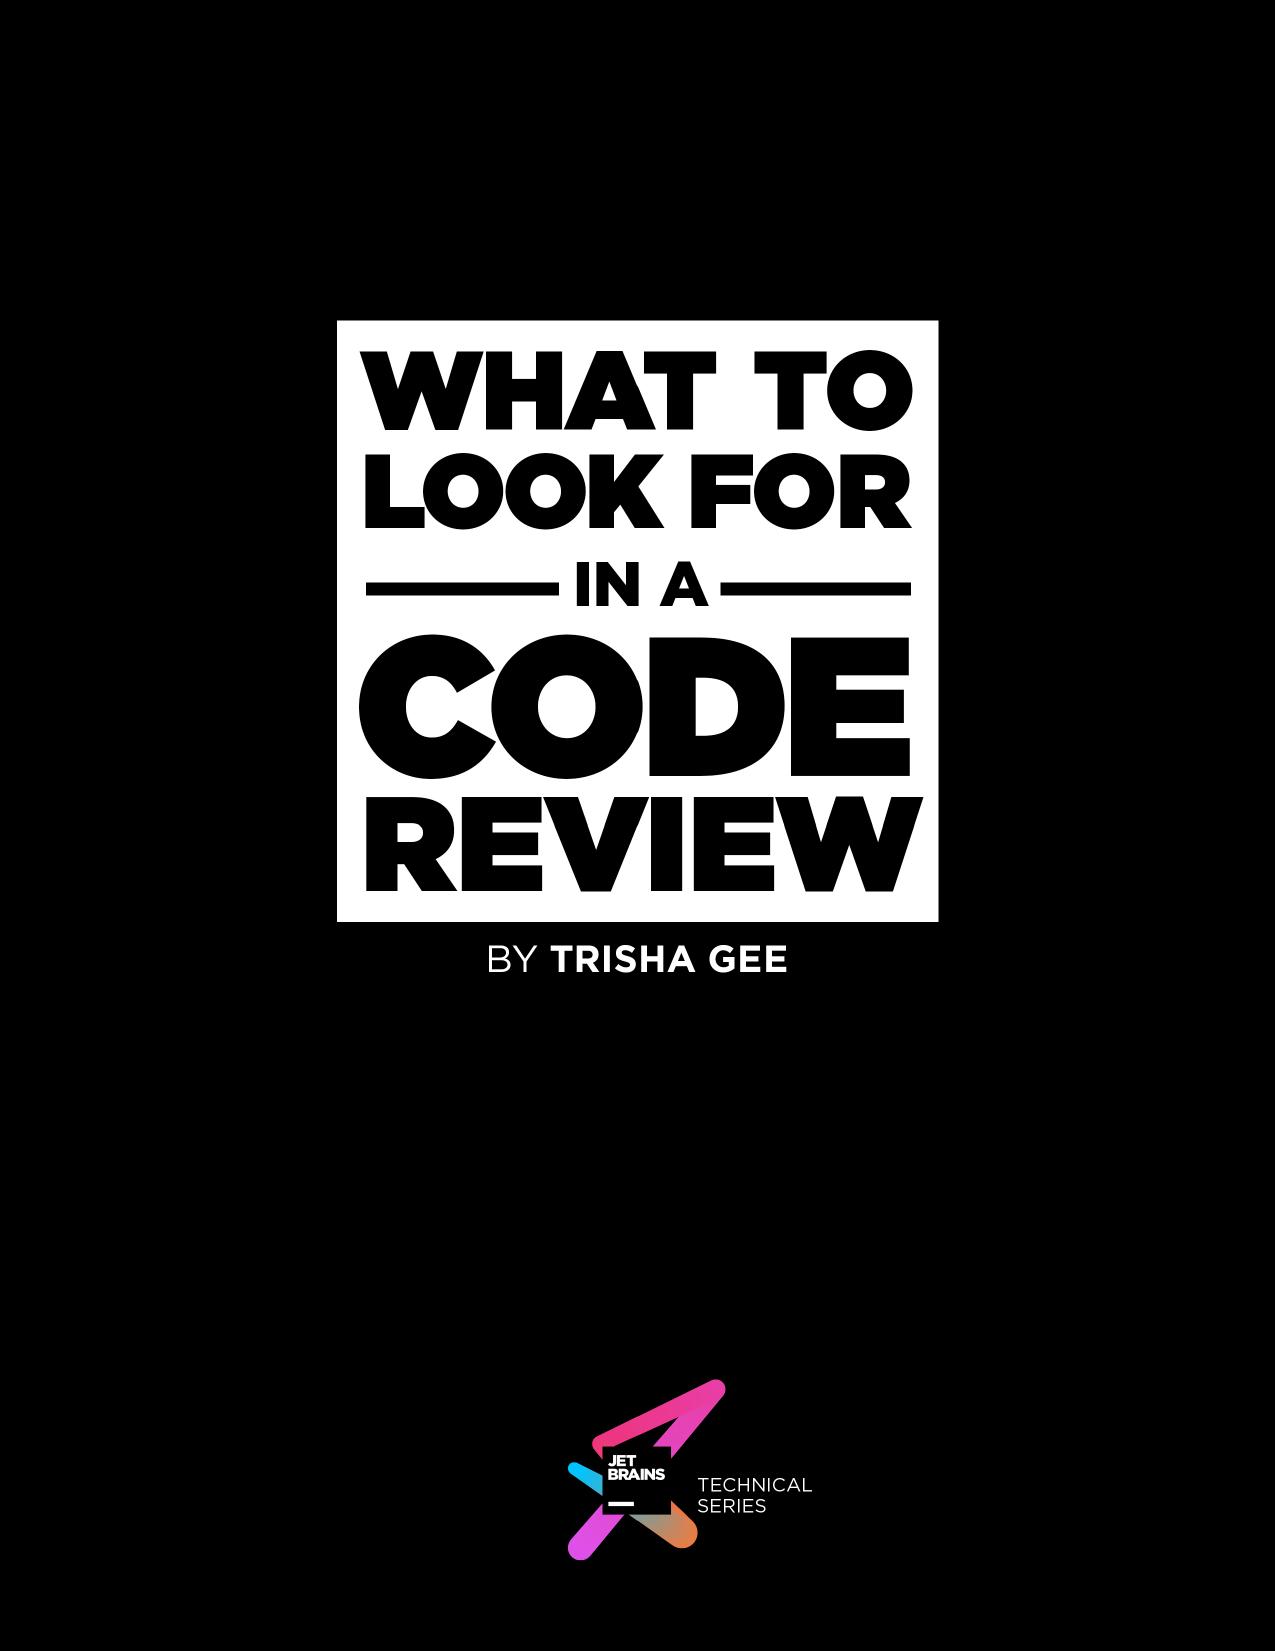 What to Look for in a Code Review